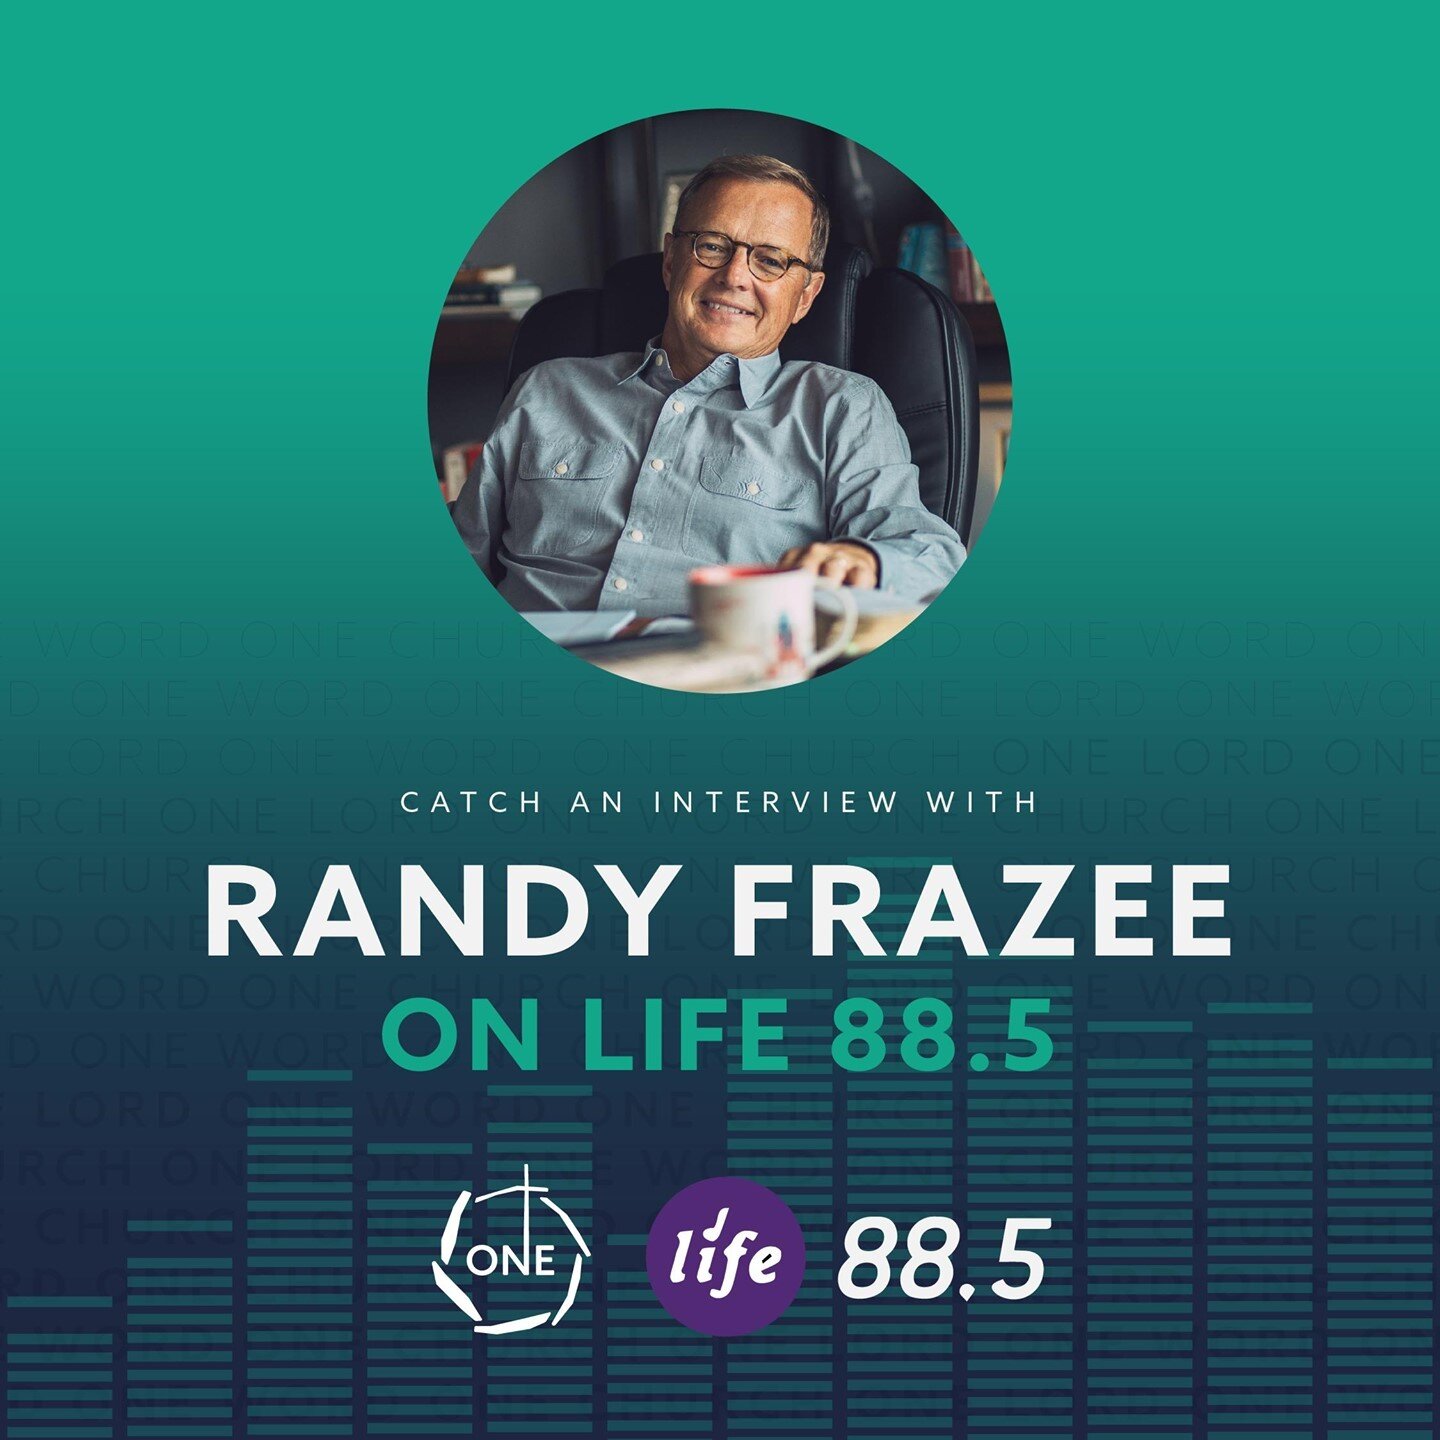 It&rsquo;s hard to believe we are now in the last week of the ONE experience. Tomorrow morning, Pastor Randy Frazee of Westside Family Church will wrap things up for us in our weekly radio updates on Life 88.5 and tell you why you definitely don&rsqu